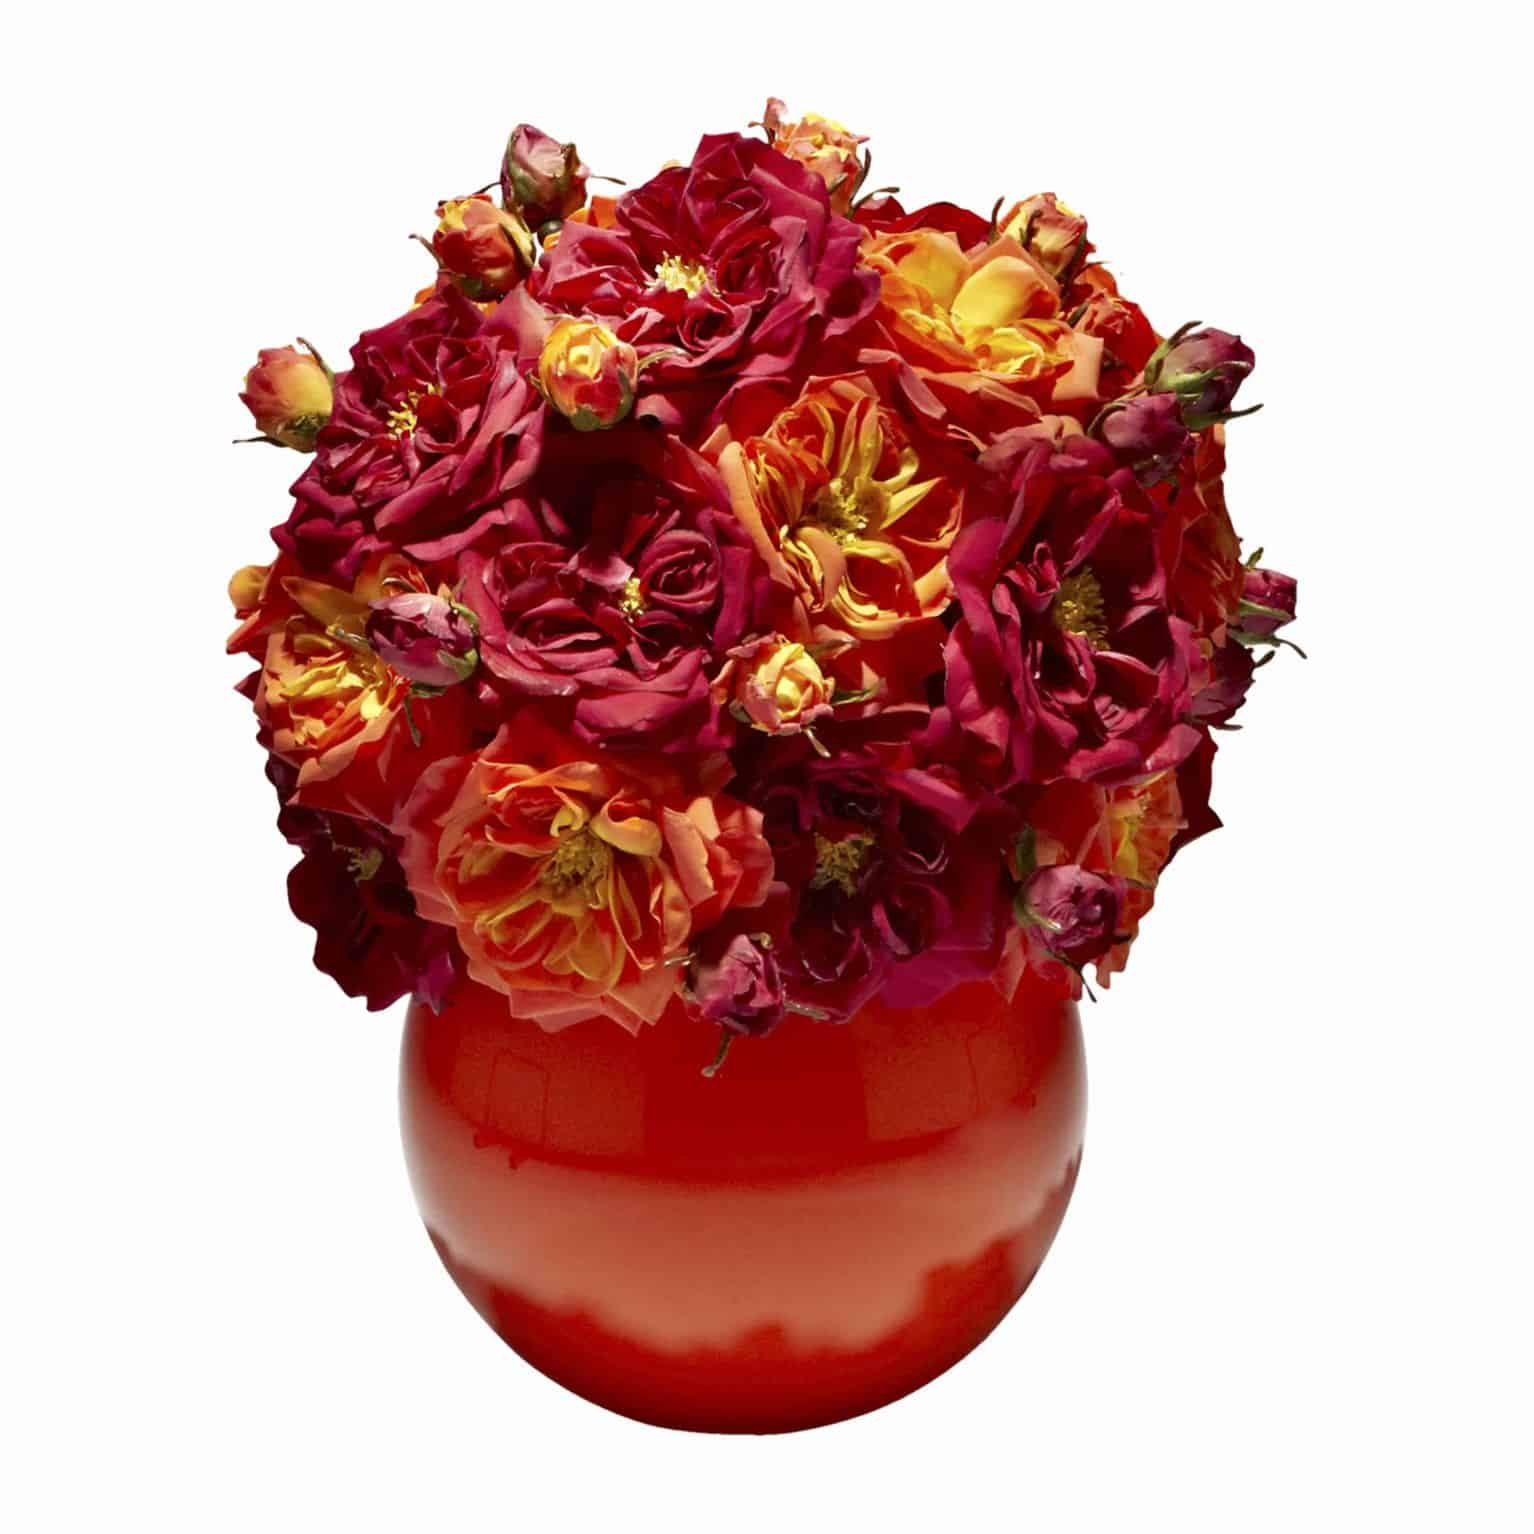 Buy our bright and stunningly beautiful flower arrangement. Supreme artificial silk roses Emperor Du Maroc in sunny orange and radiant red.